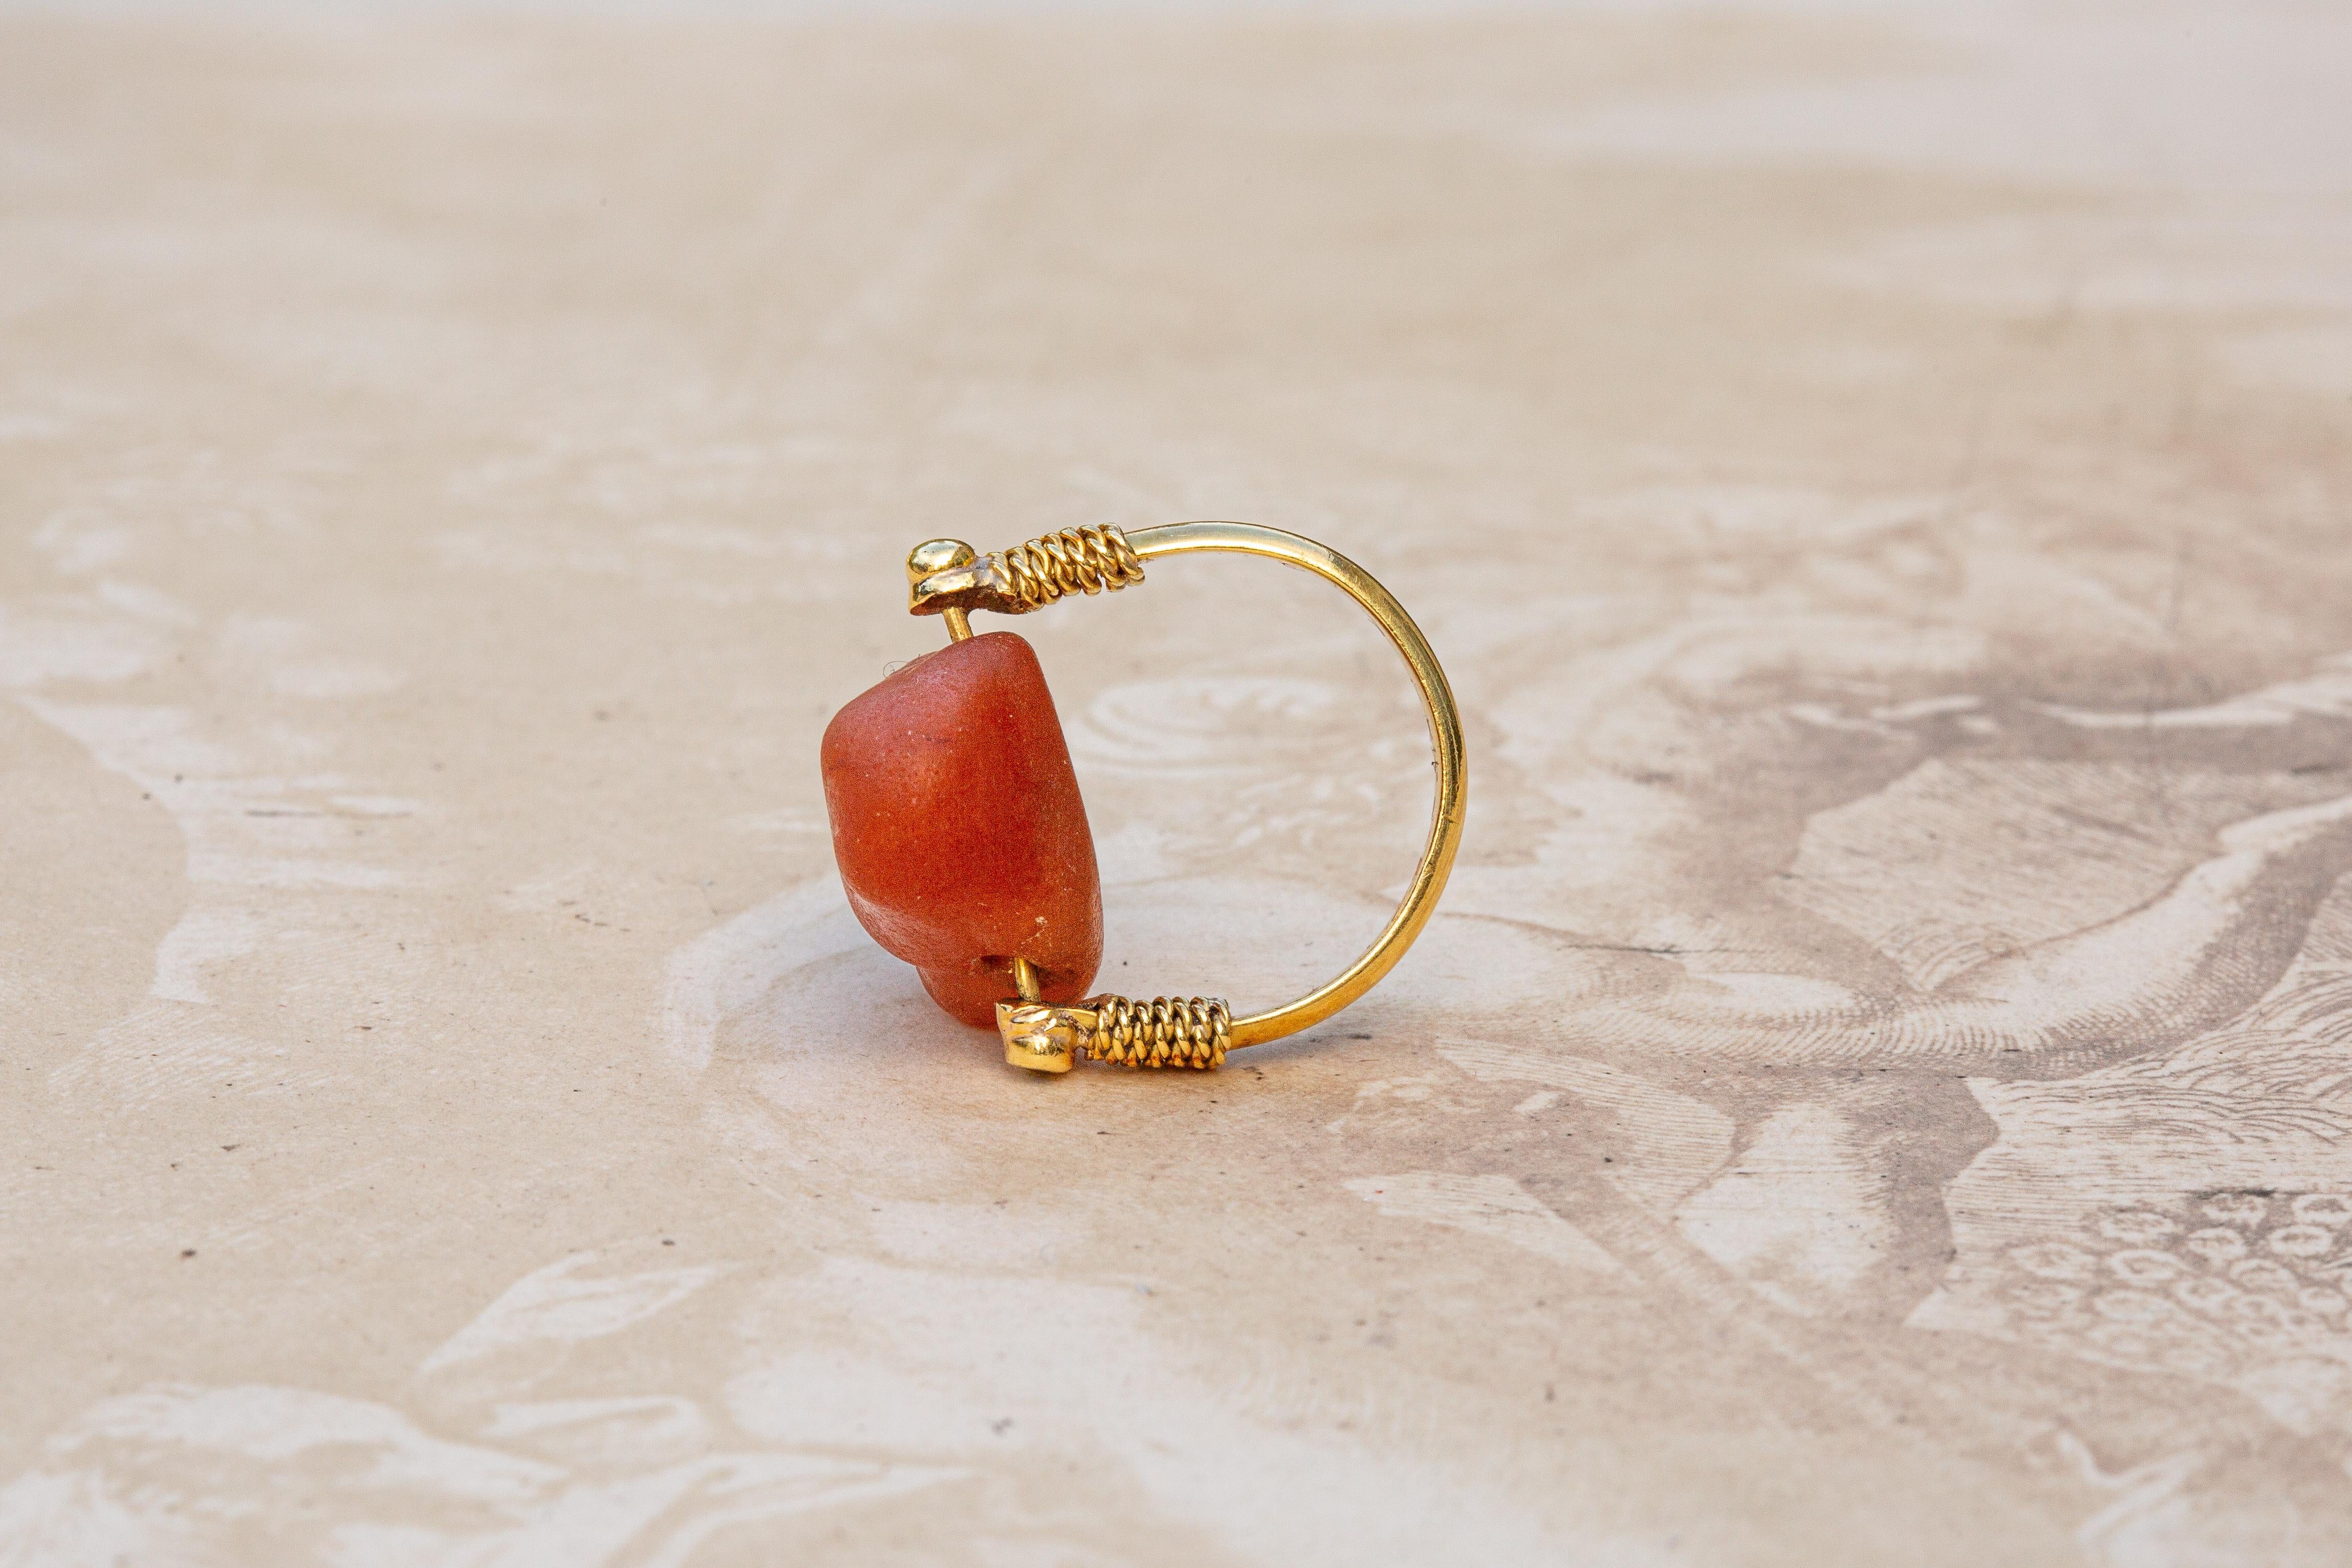 Rare Ancient Egyptian Carved Carnelian Frog Amulet Swivel Ring 18th Dynasty In Good Condition For Sale In London, GB